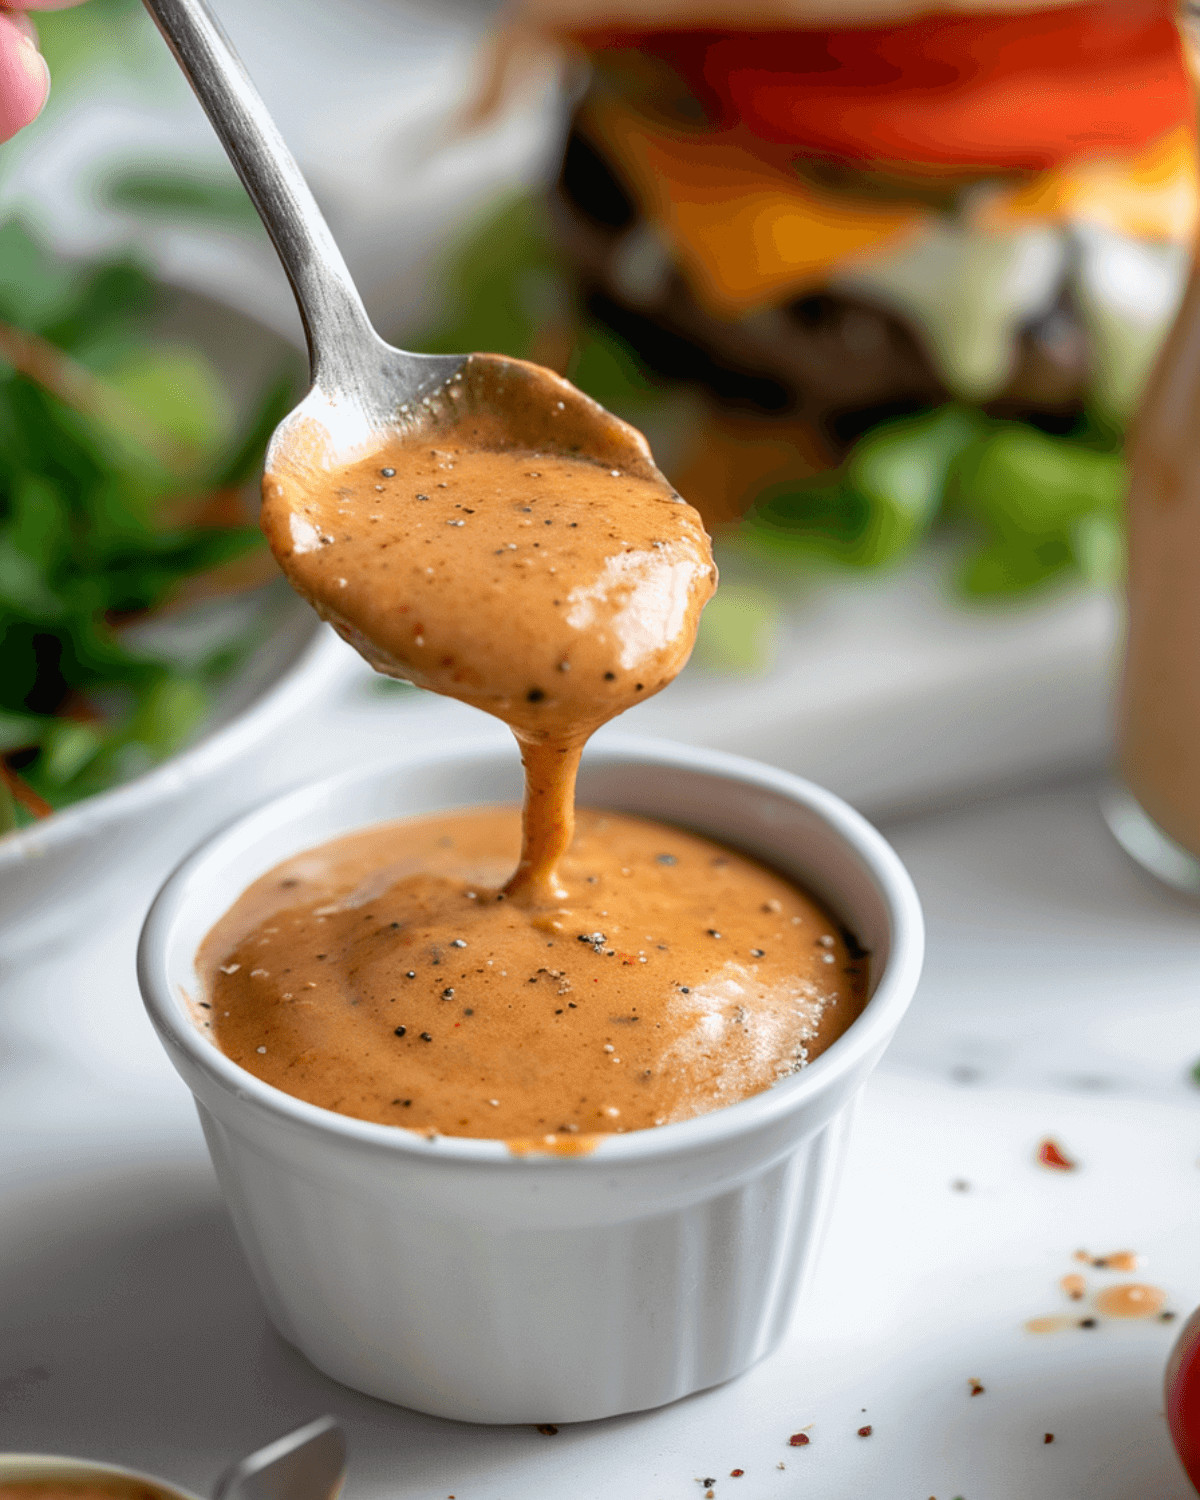 Burger sauce dripping off a spoon.